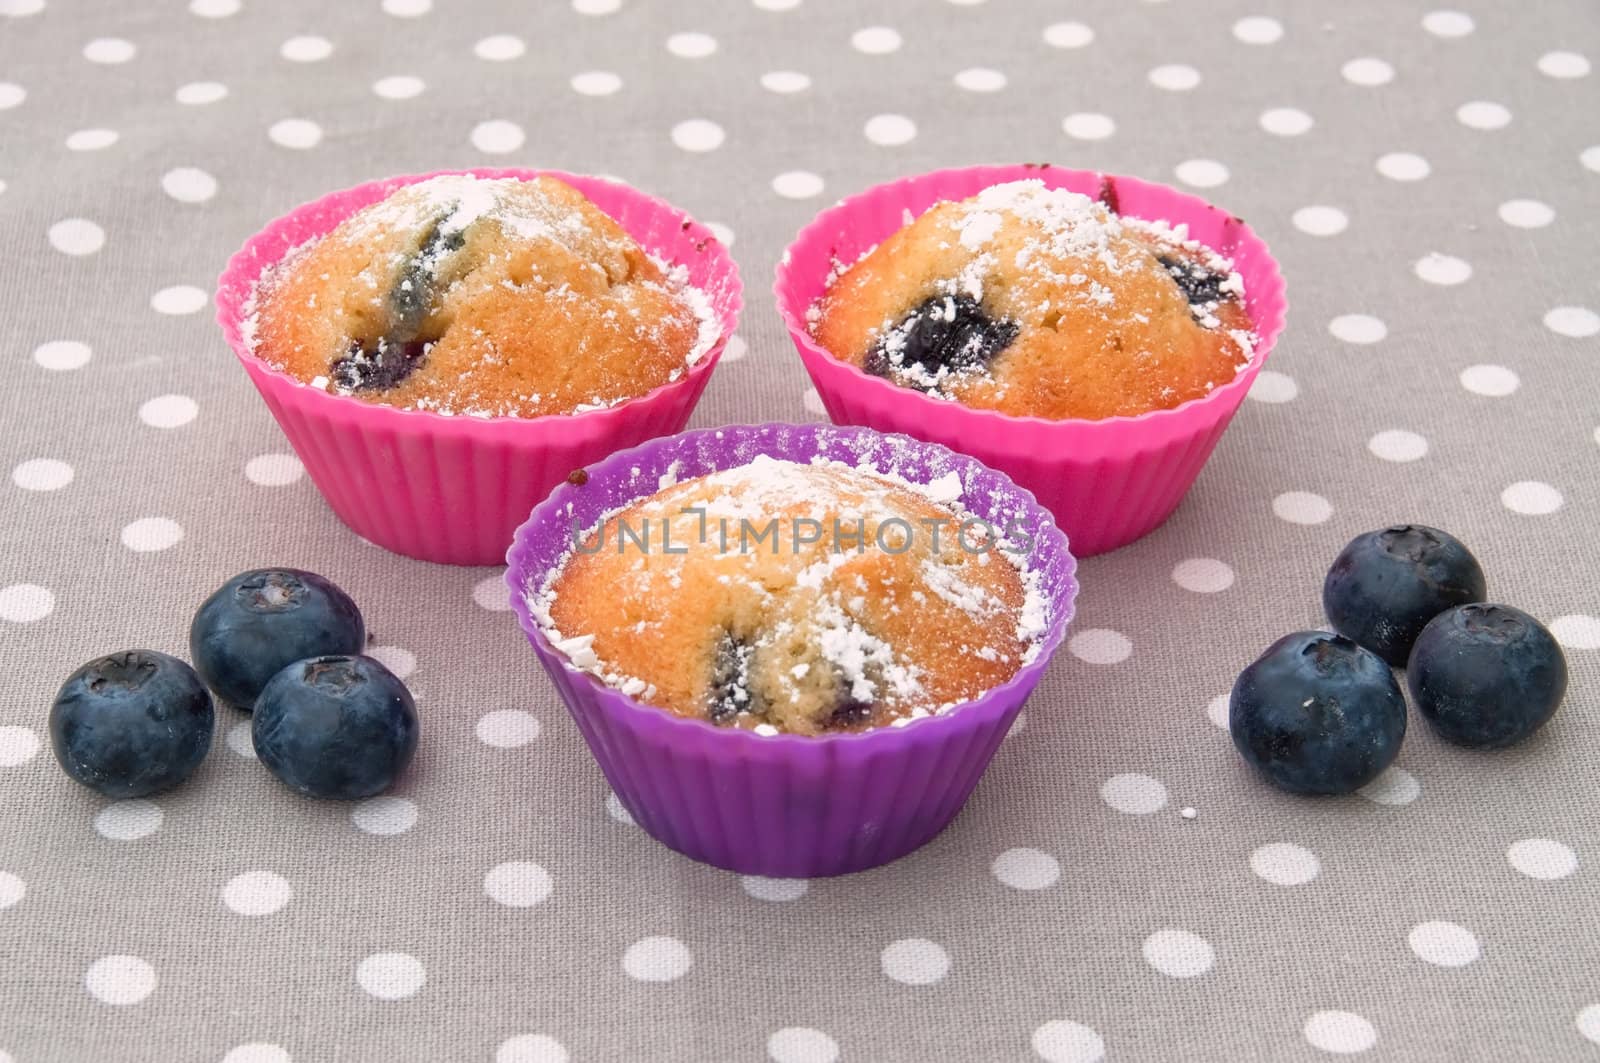 Blueberry muffins by GryT